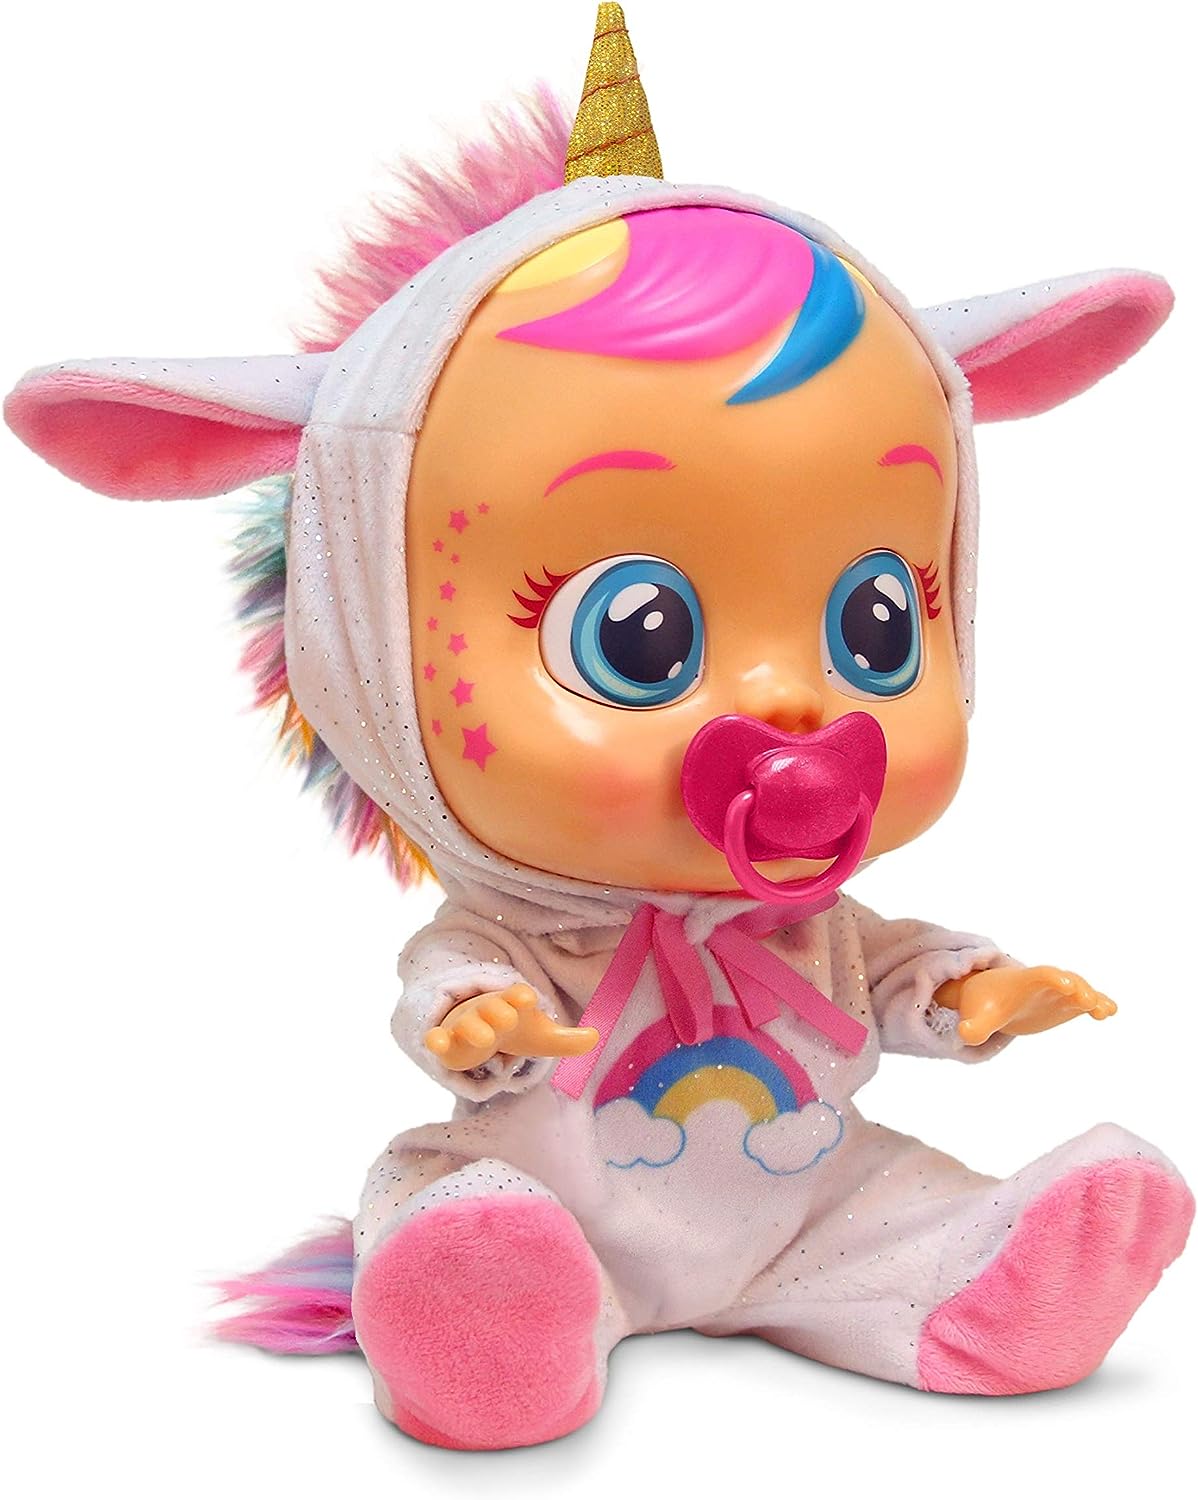 Best Crying Baby Doll Online Sellers, Save 42% 